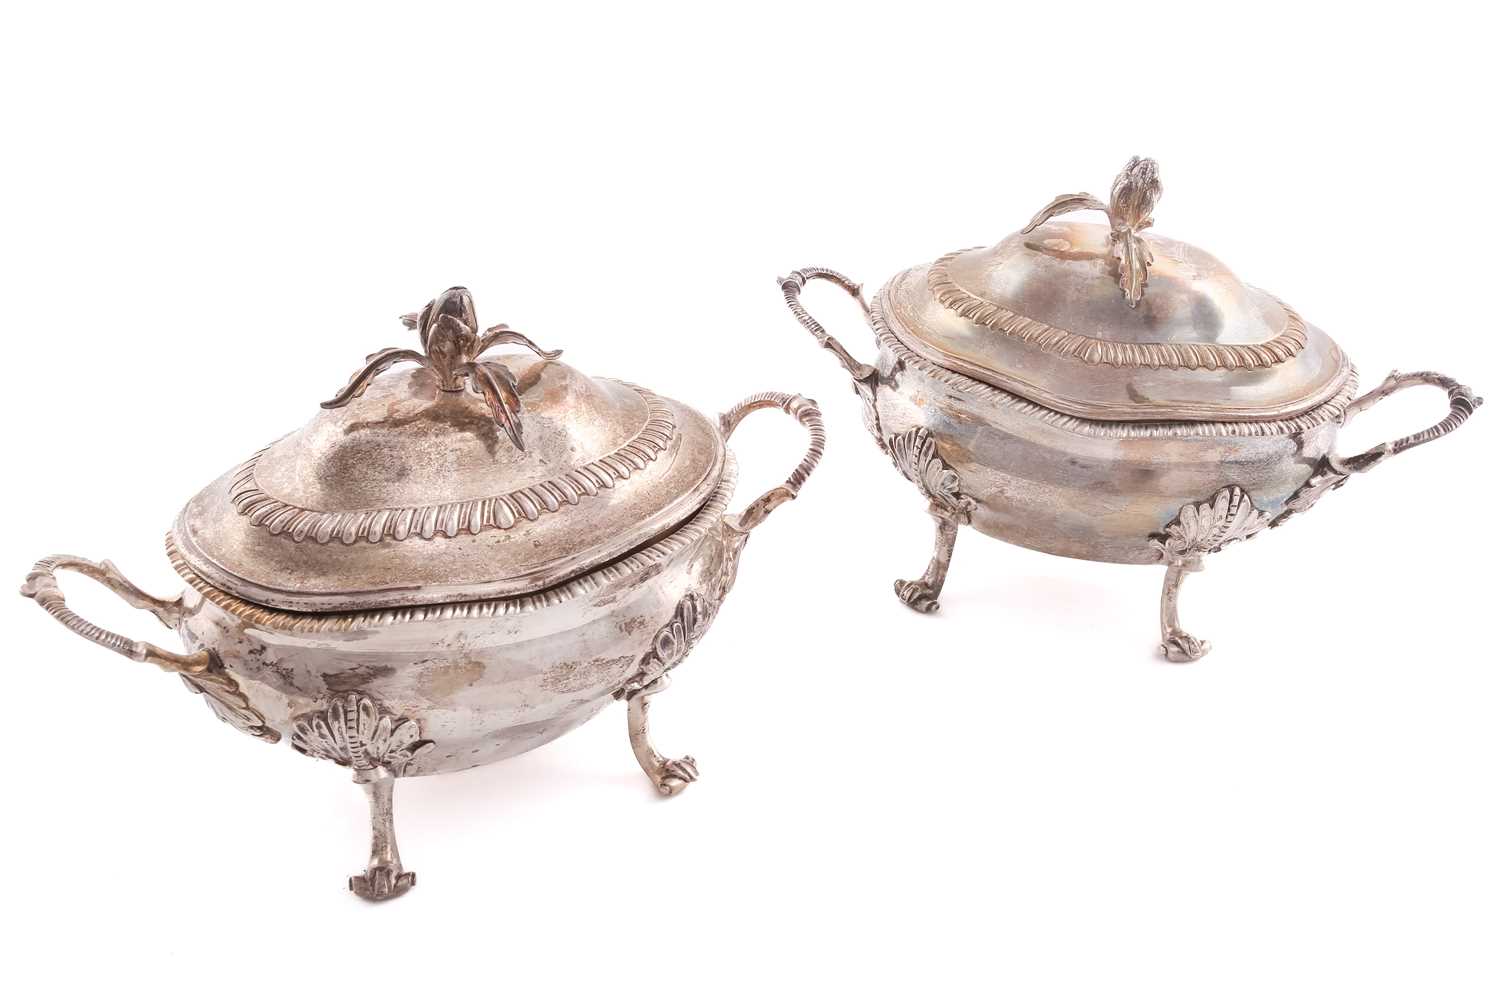 A pair of George III silver sauce tureens and covers, London 1771 by Robert Peaston, twin handled